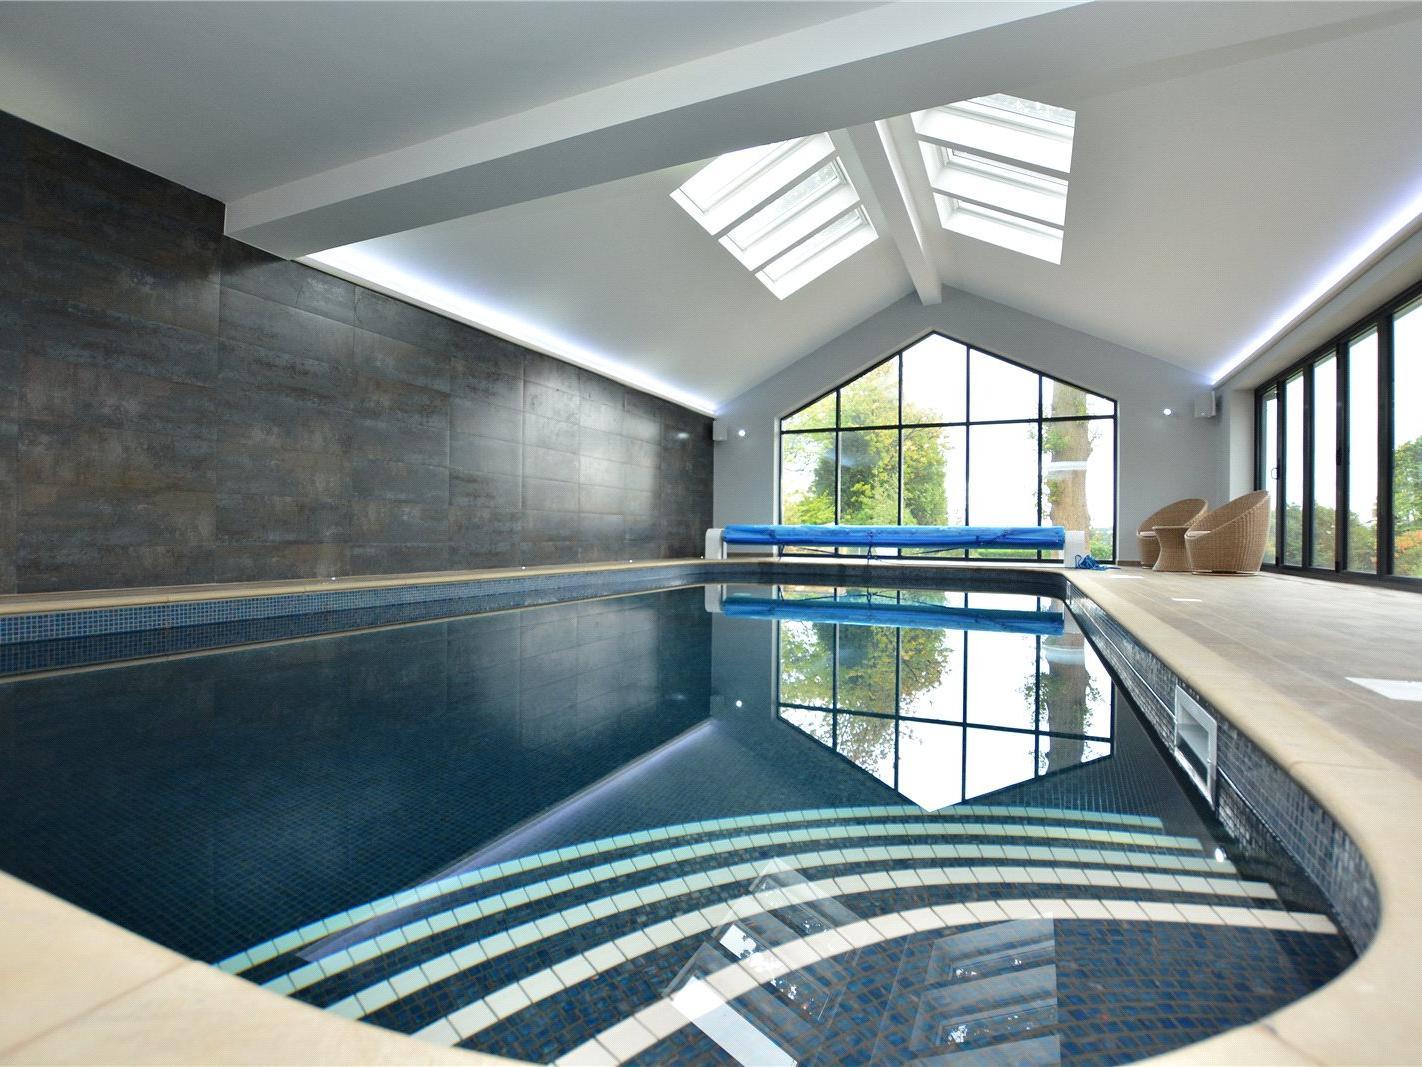 Hunts Land comes with a 30 ft heated indoor swimming pool.